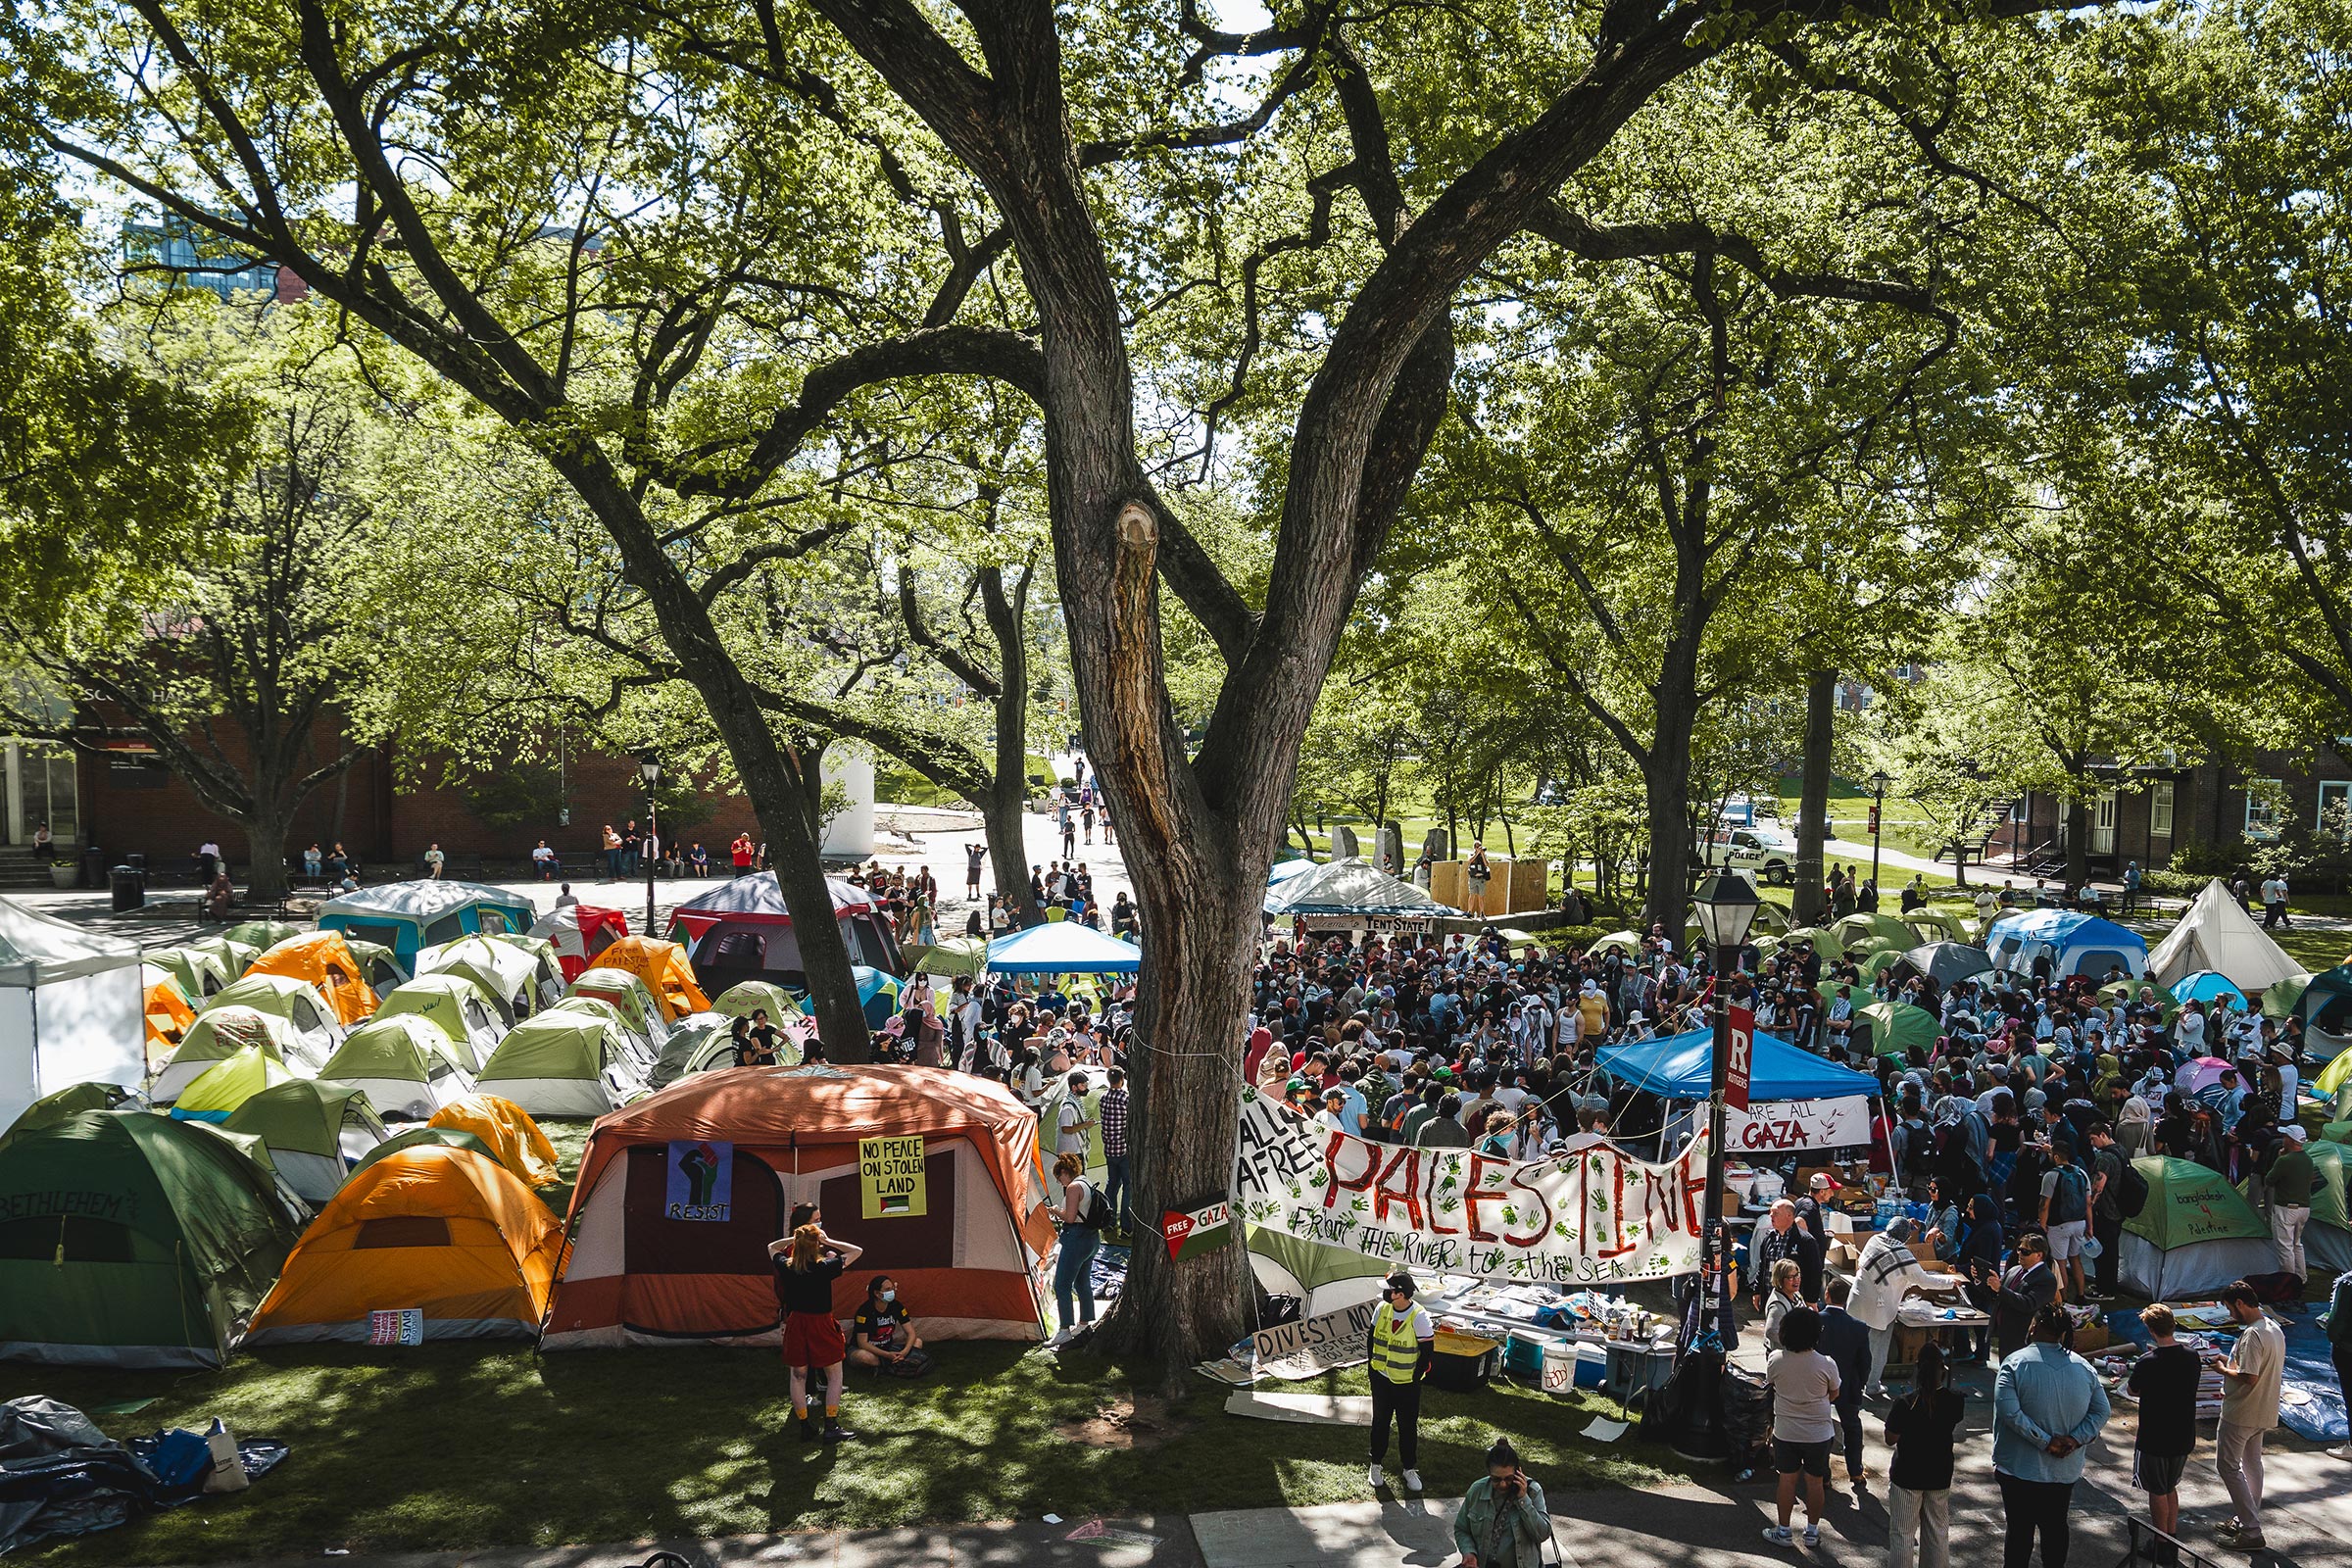 Tents surround protesters as they gather at Rutgers University's College Avenue campus.